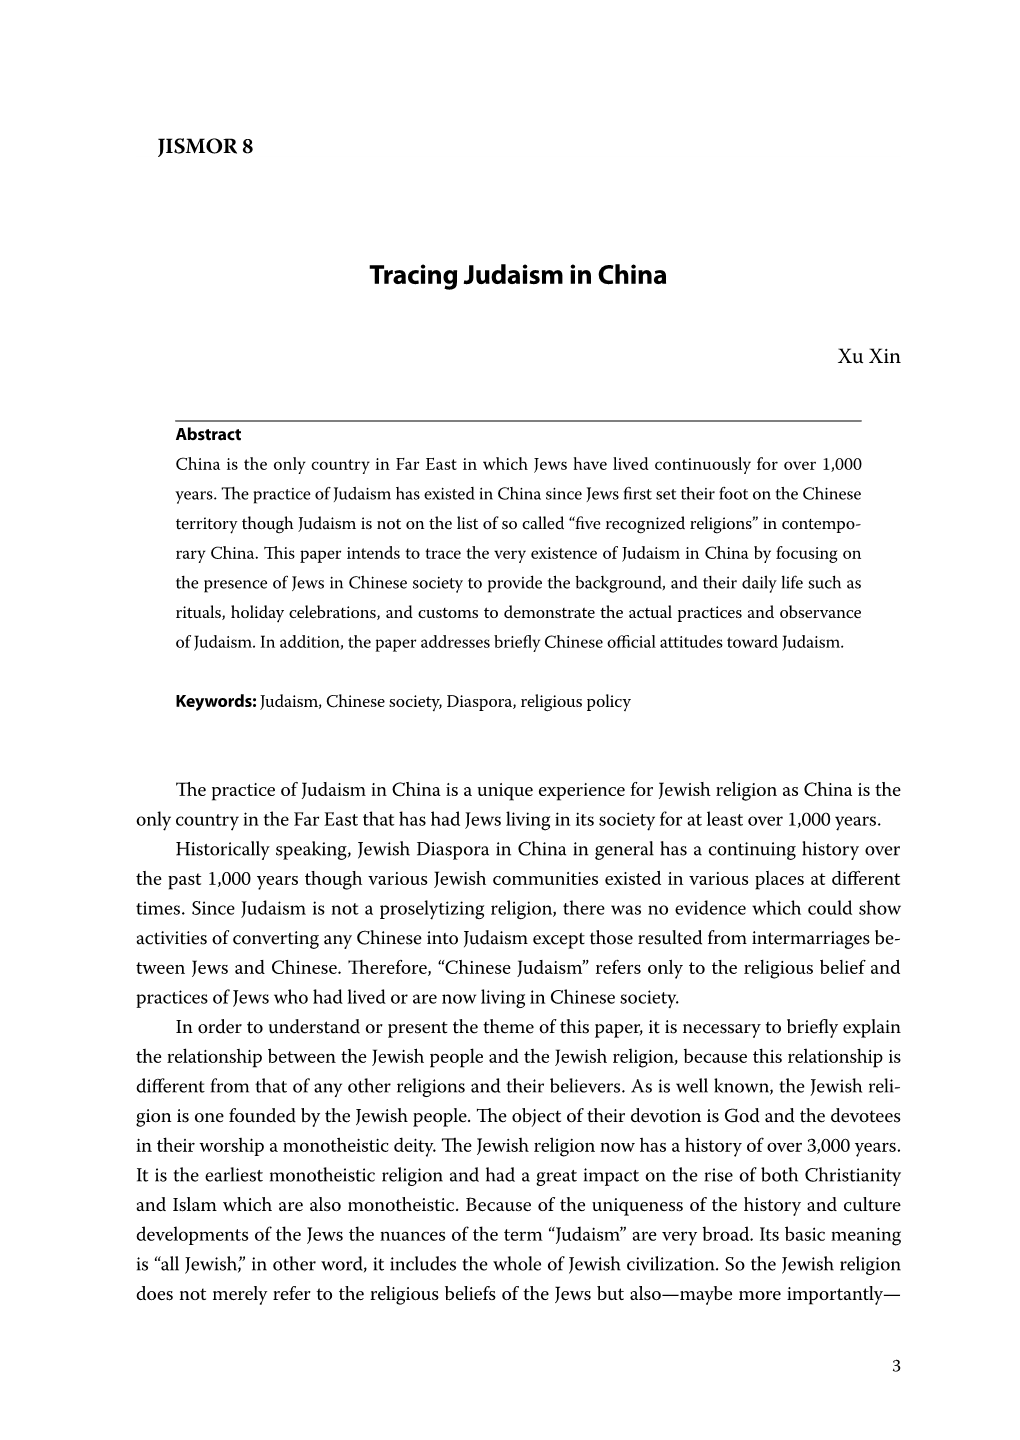 Tracing Judaism in China